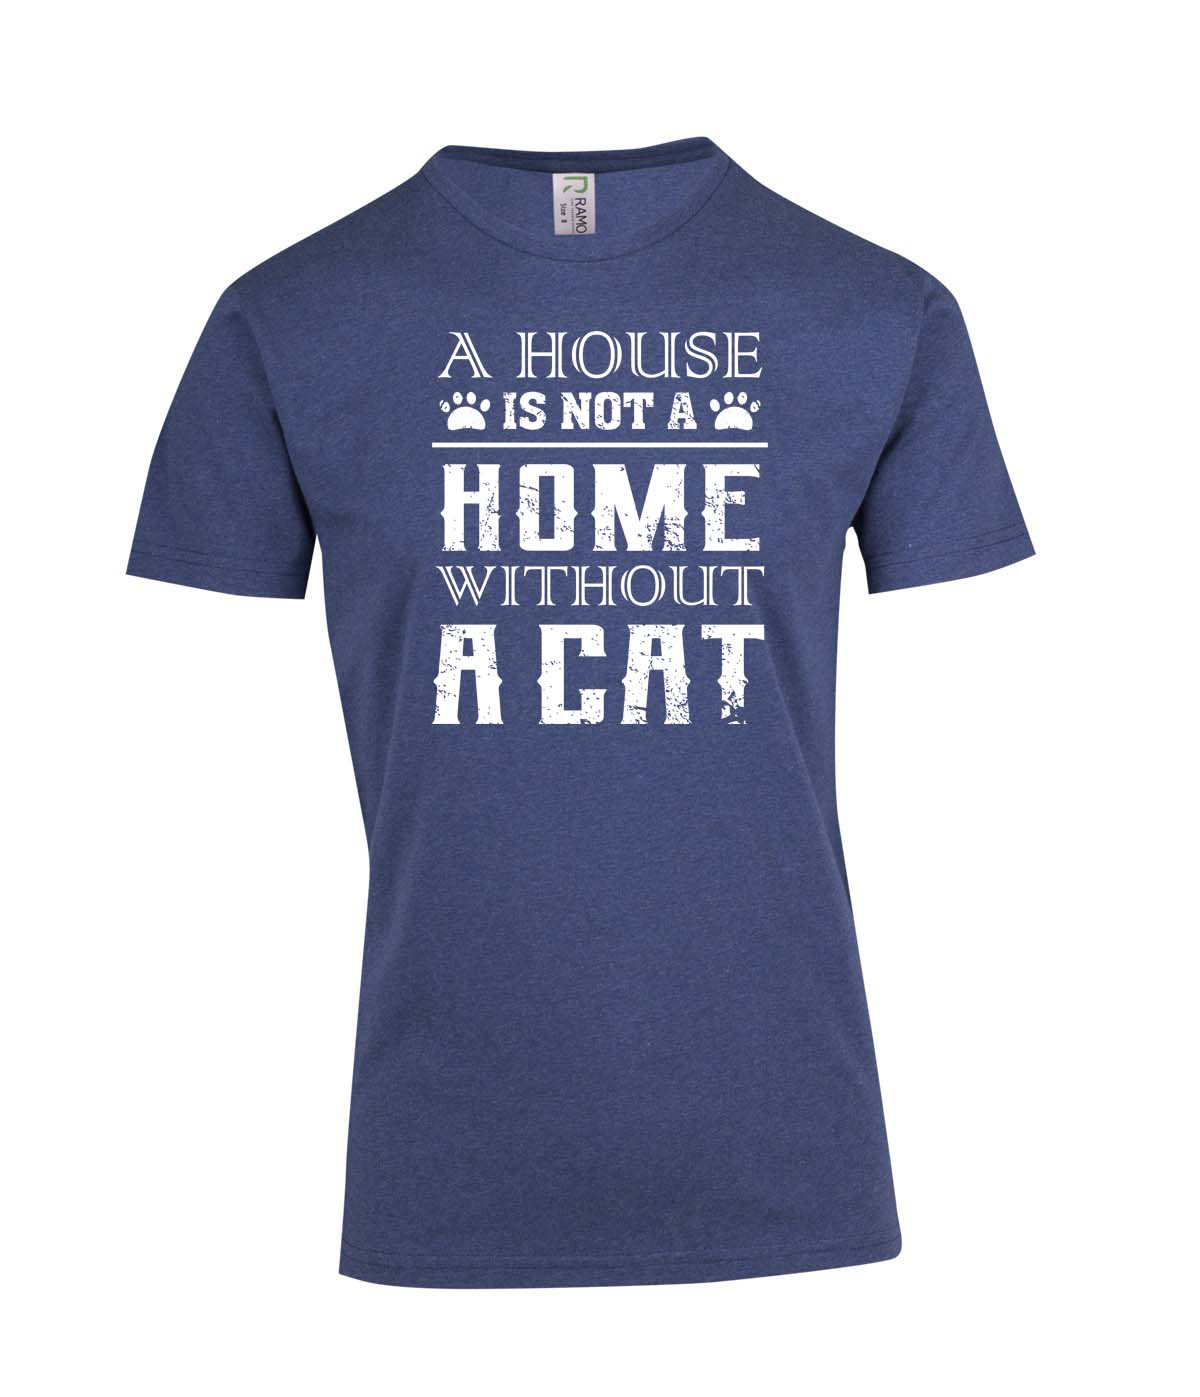 Perth Animal Rescue Double Sided Marl T-shirt - A house is not a home without a cat